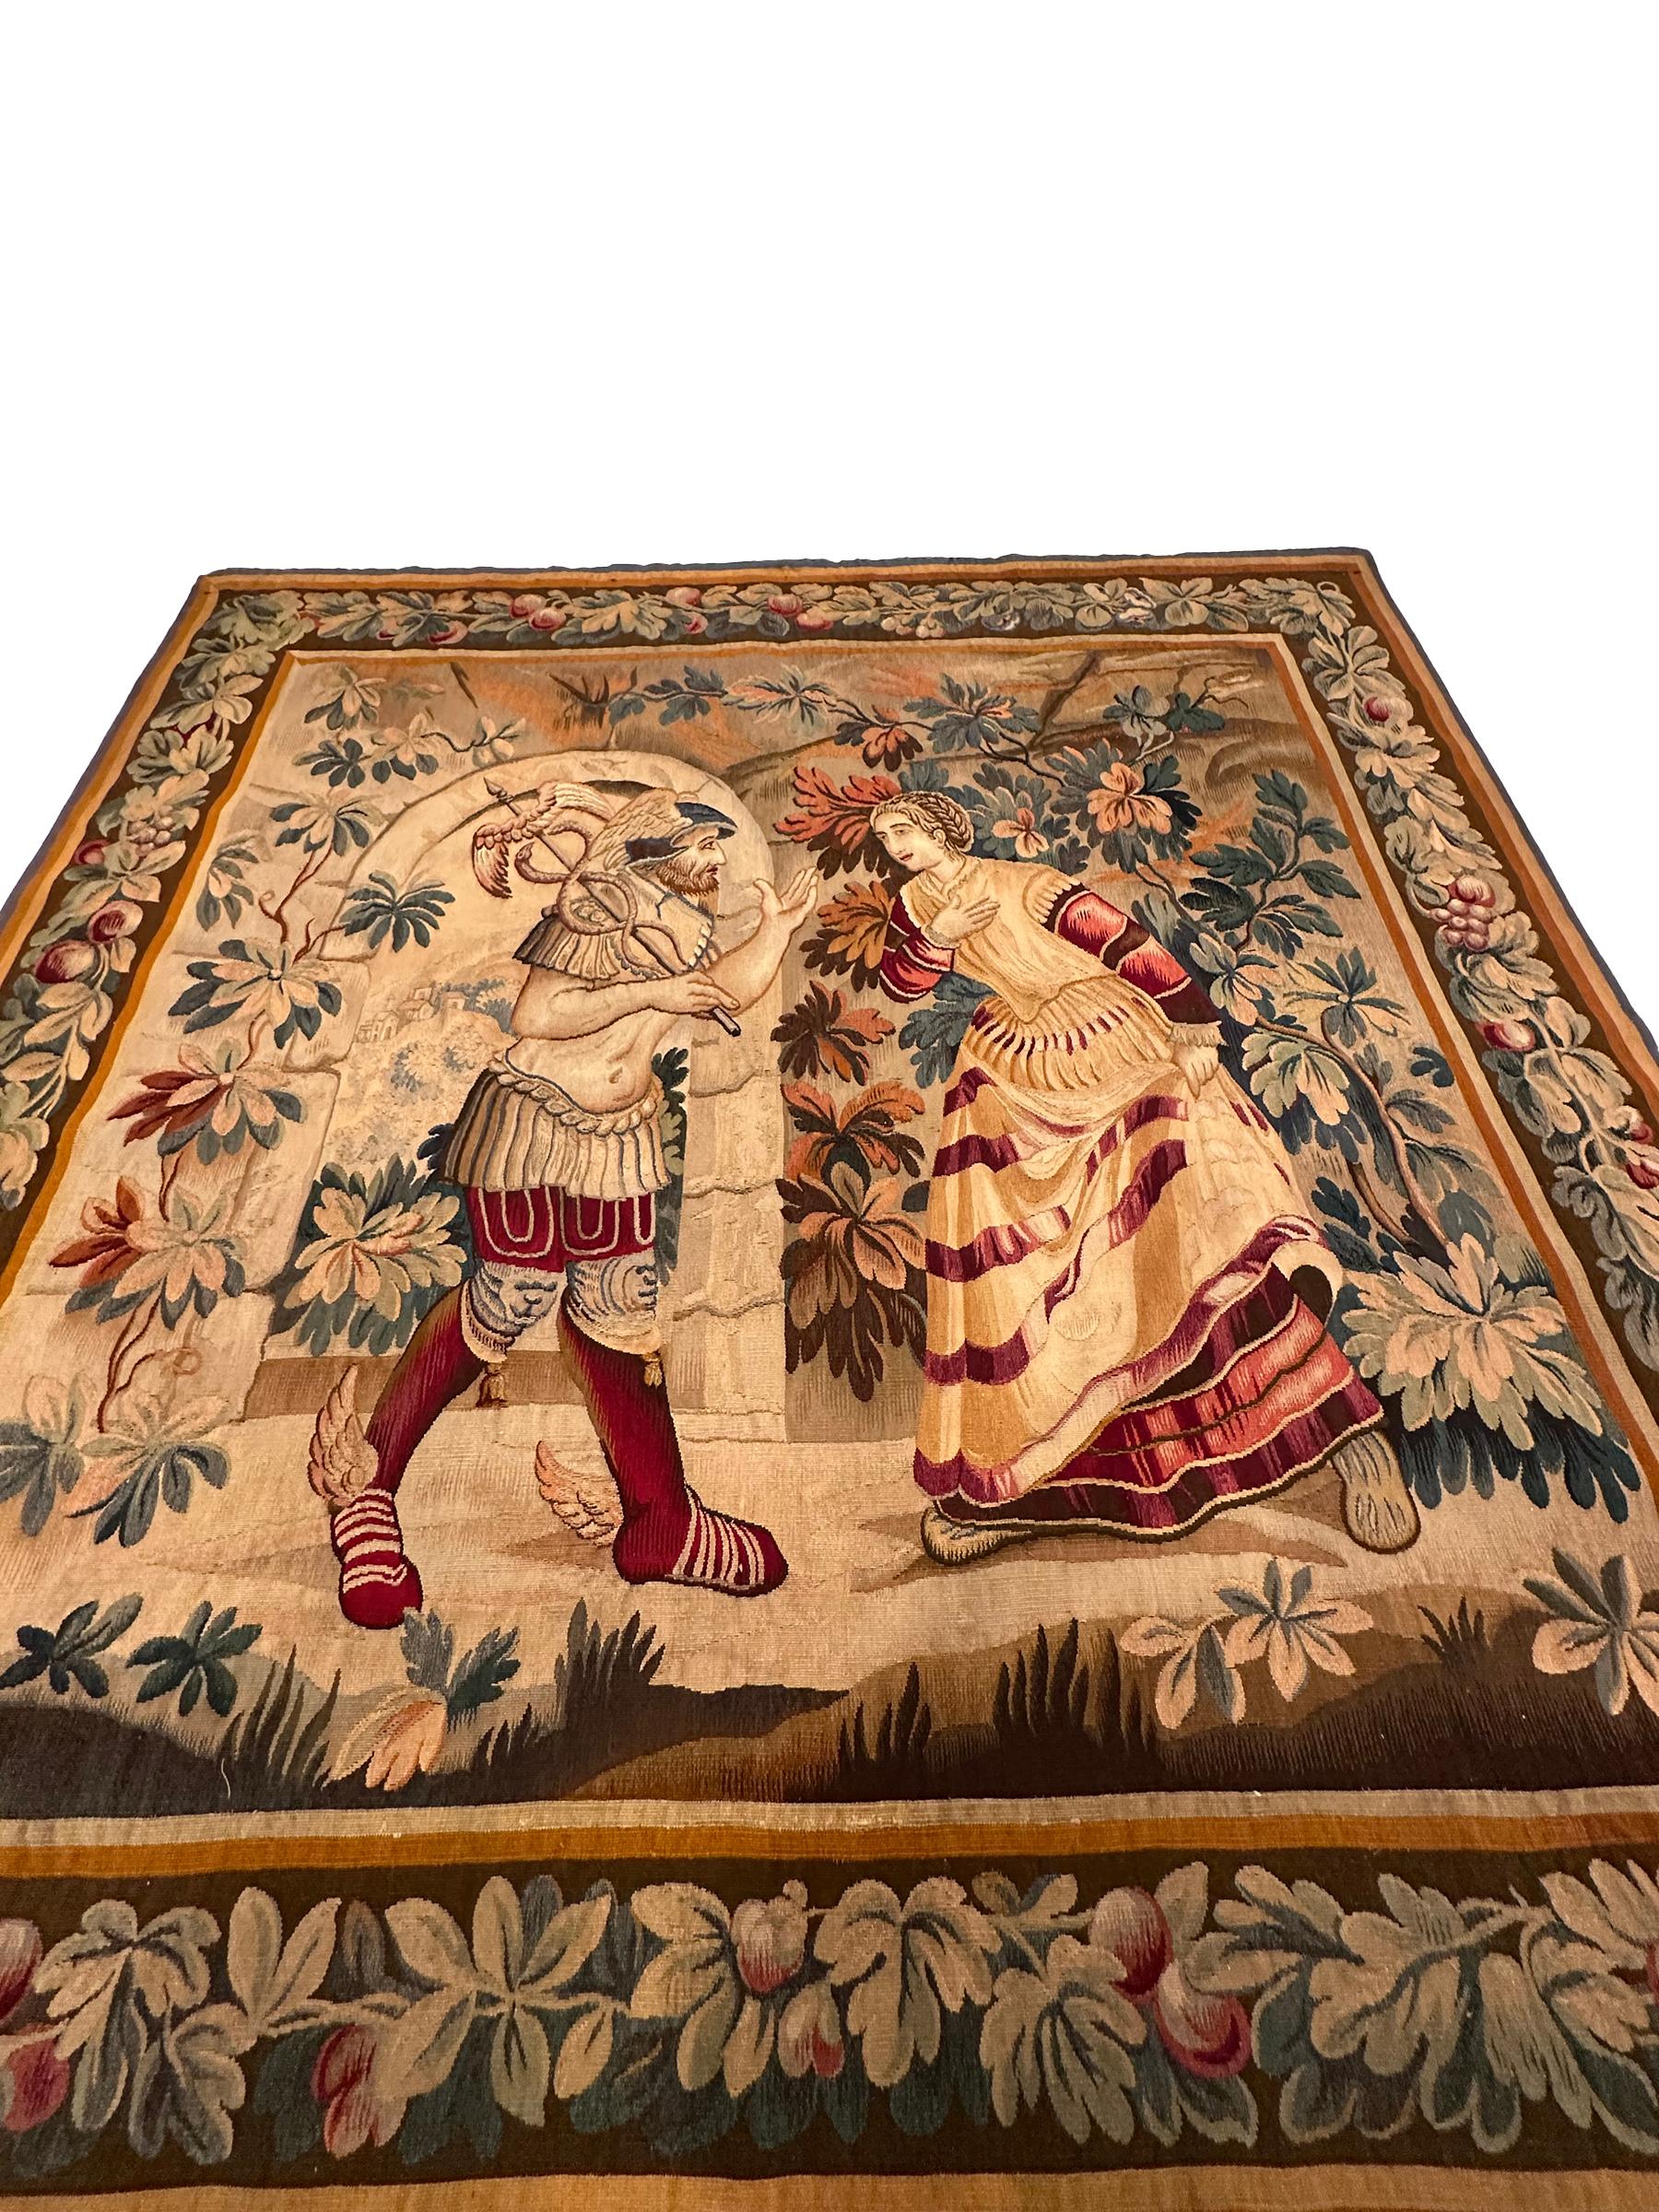 Antique French Aubusson Tapestry Hermes Mercury Wool & Silk Square 6x6 176x178cm In Good Condition For Sale In New York, NY